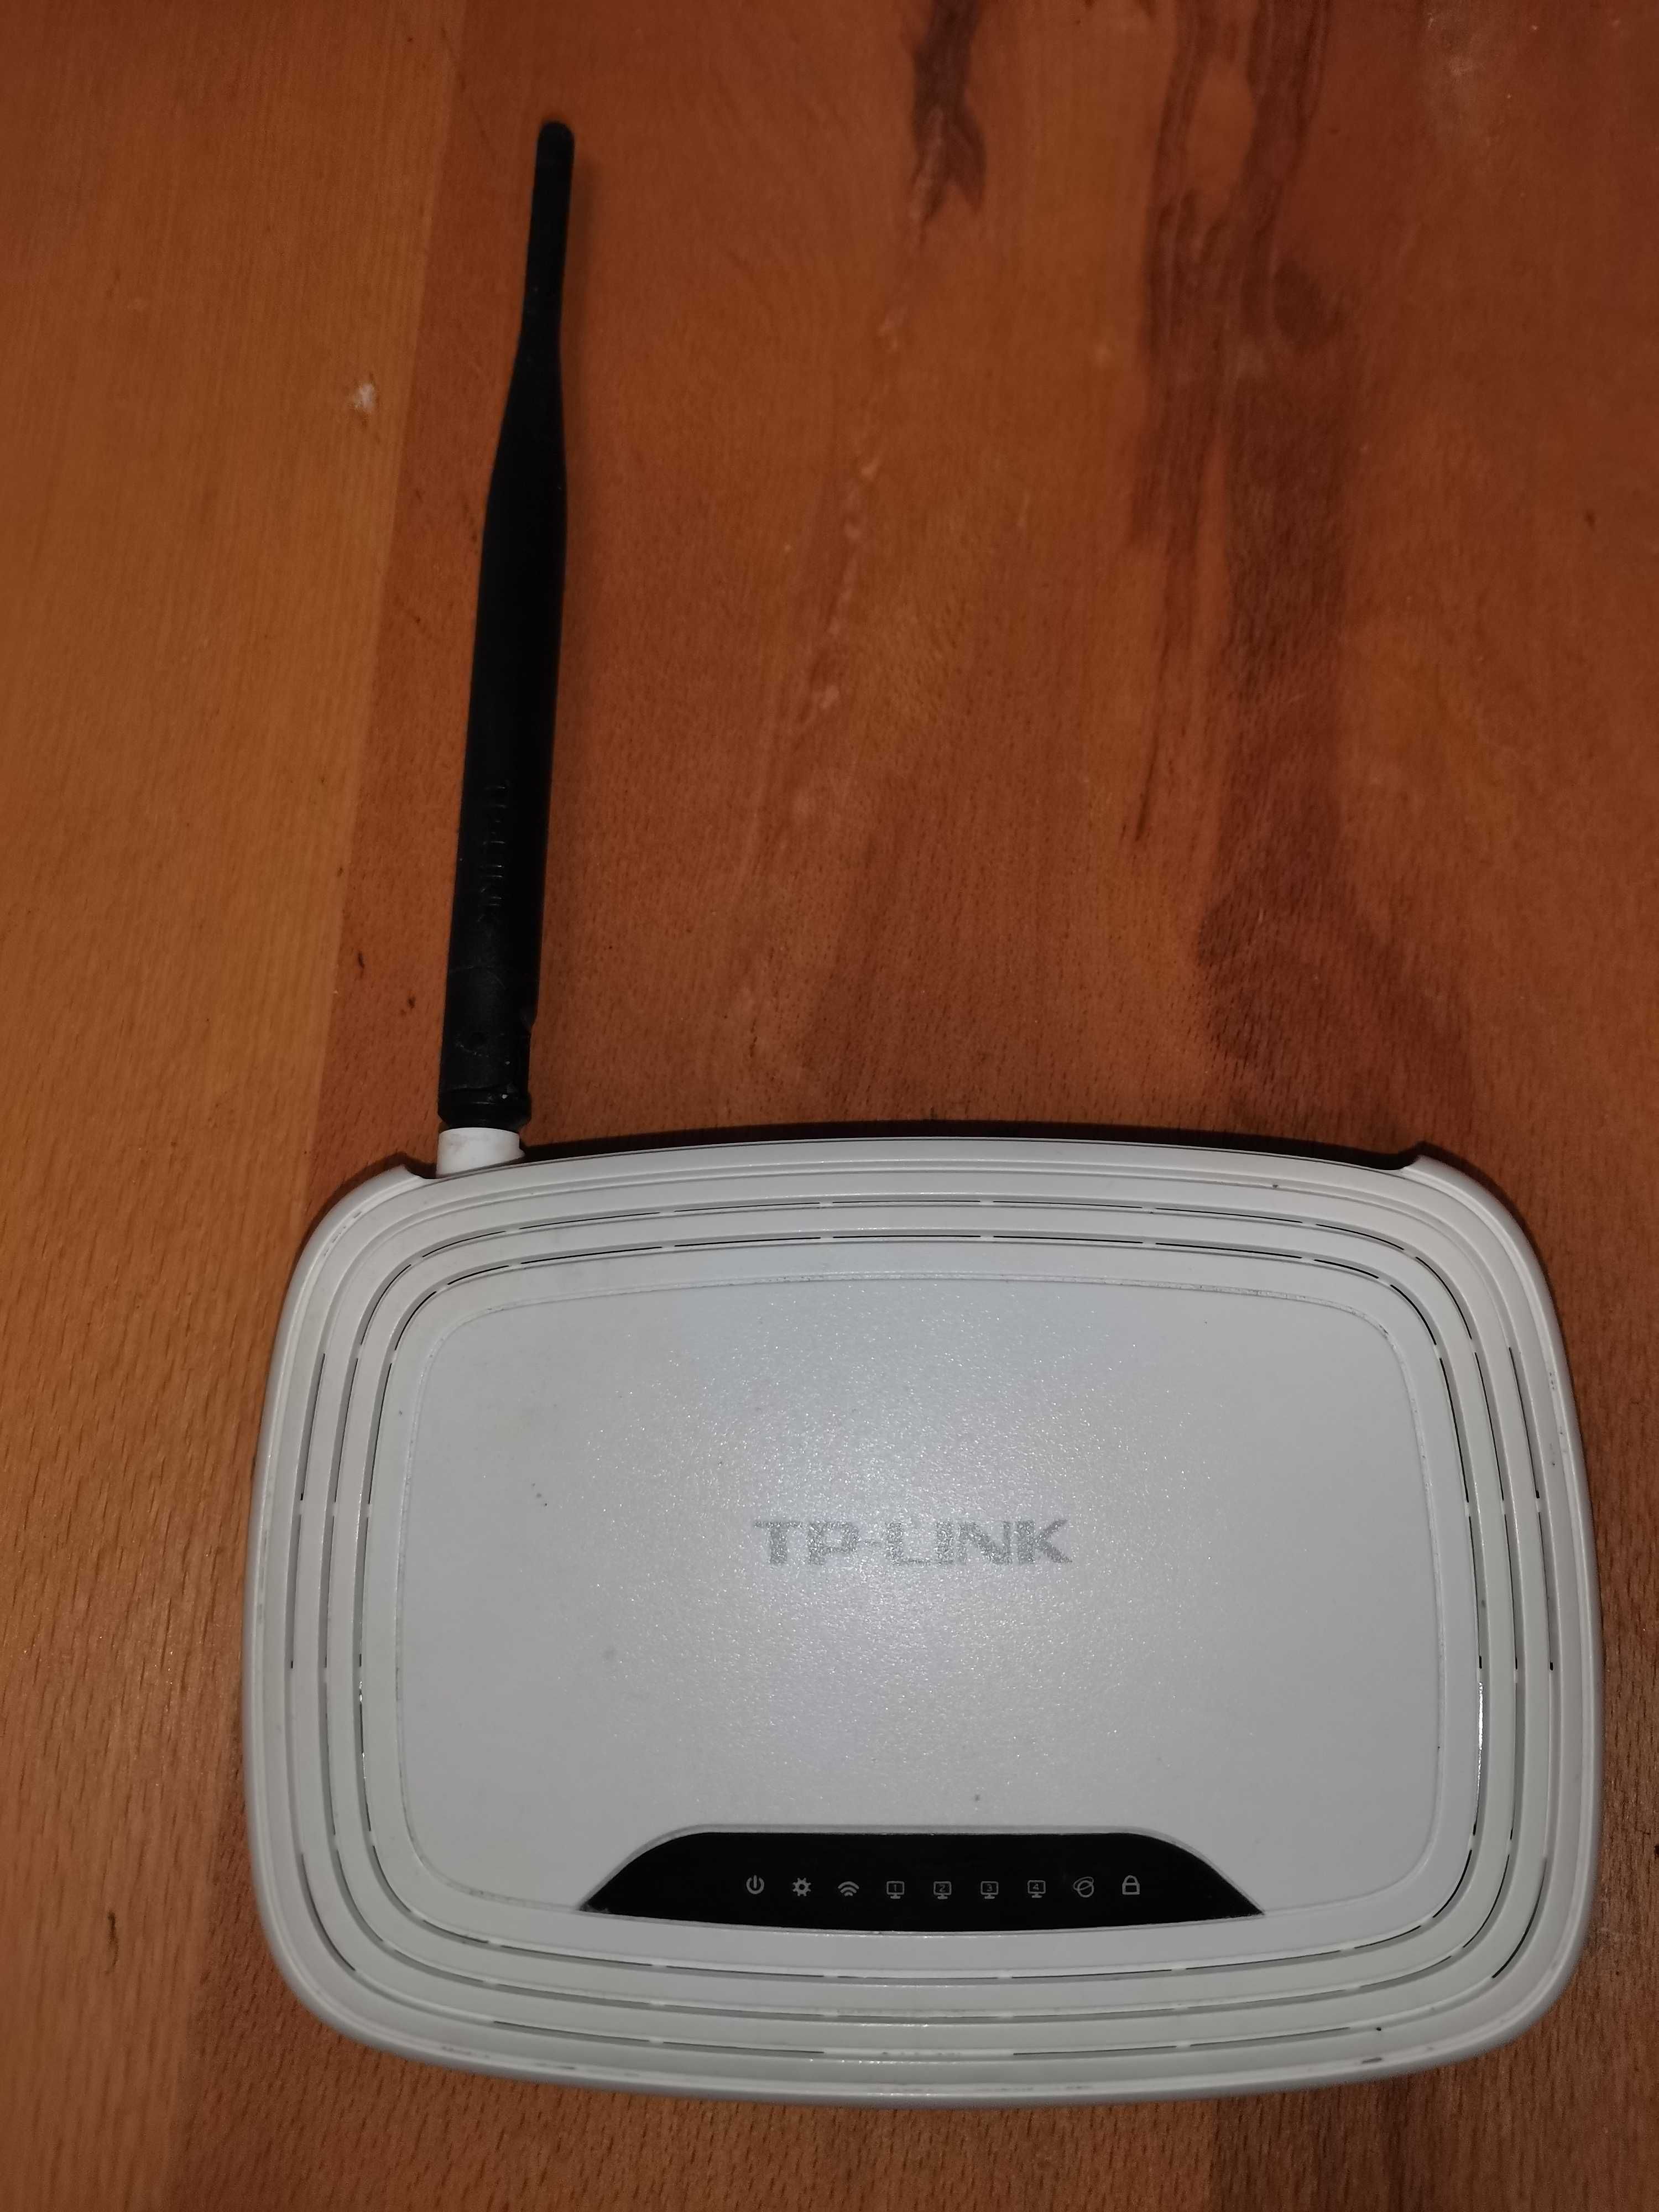 Routere TP-LINk model TL-WR740N si TL-WR841N perfect functionale